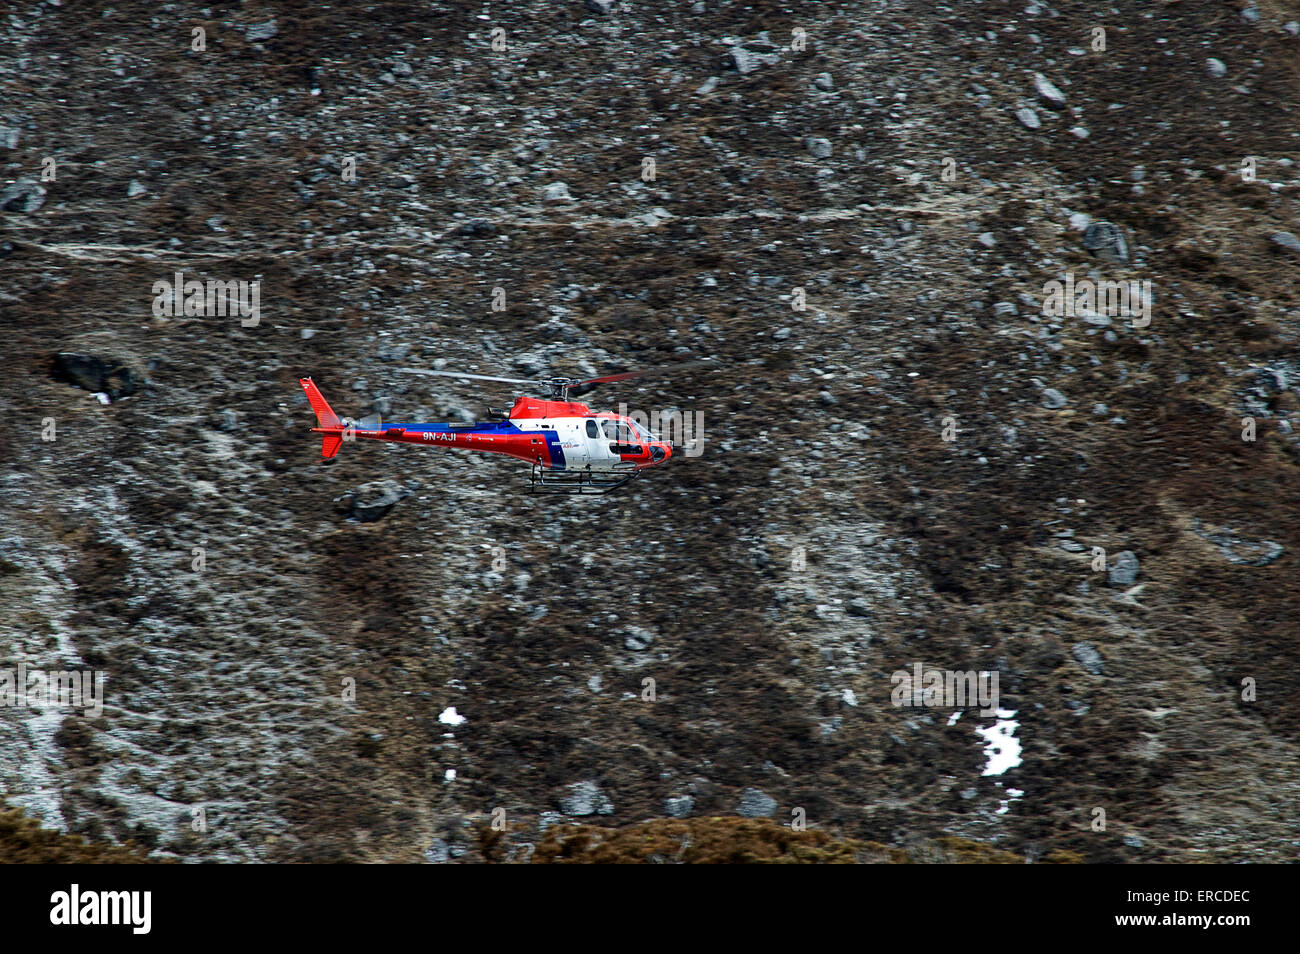 A Eurocopter AS350 B3 Squirrel helicopter belonging to Fishtail Air flying in the Khumbu, Nepal. Stock Photo